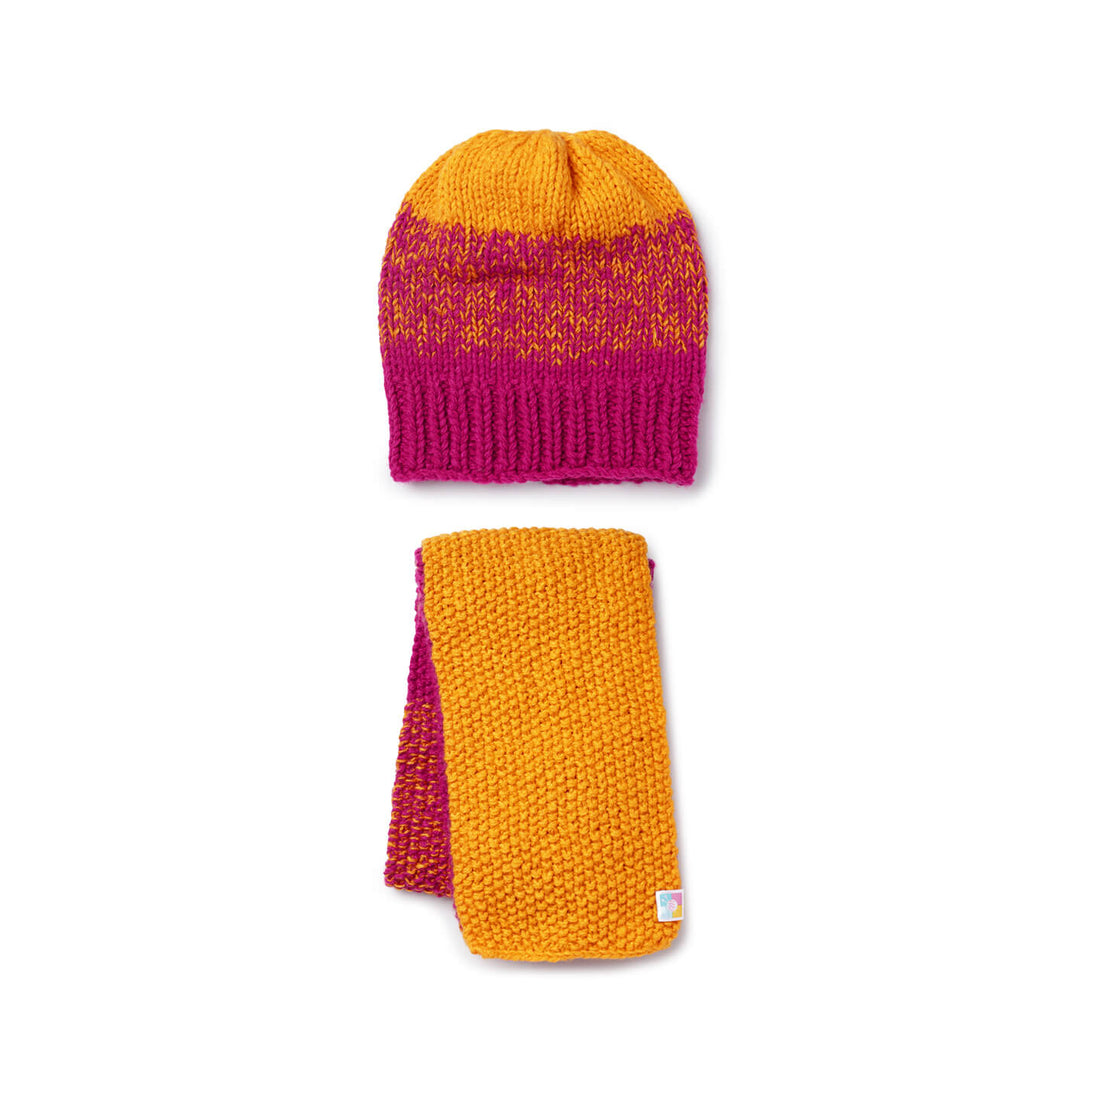 Beanie and Scarf Coordinating Set - 3310